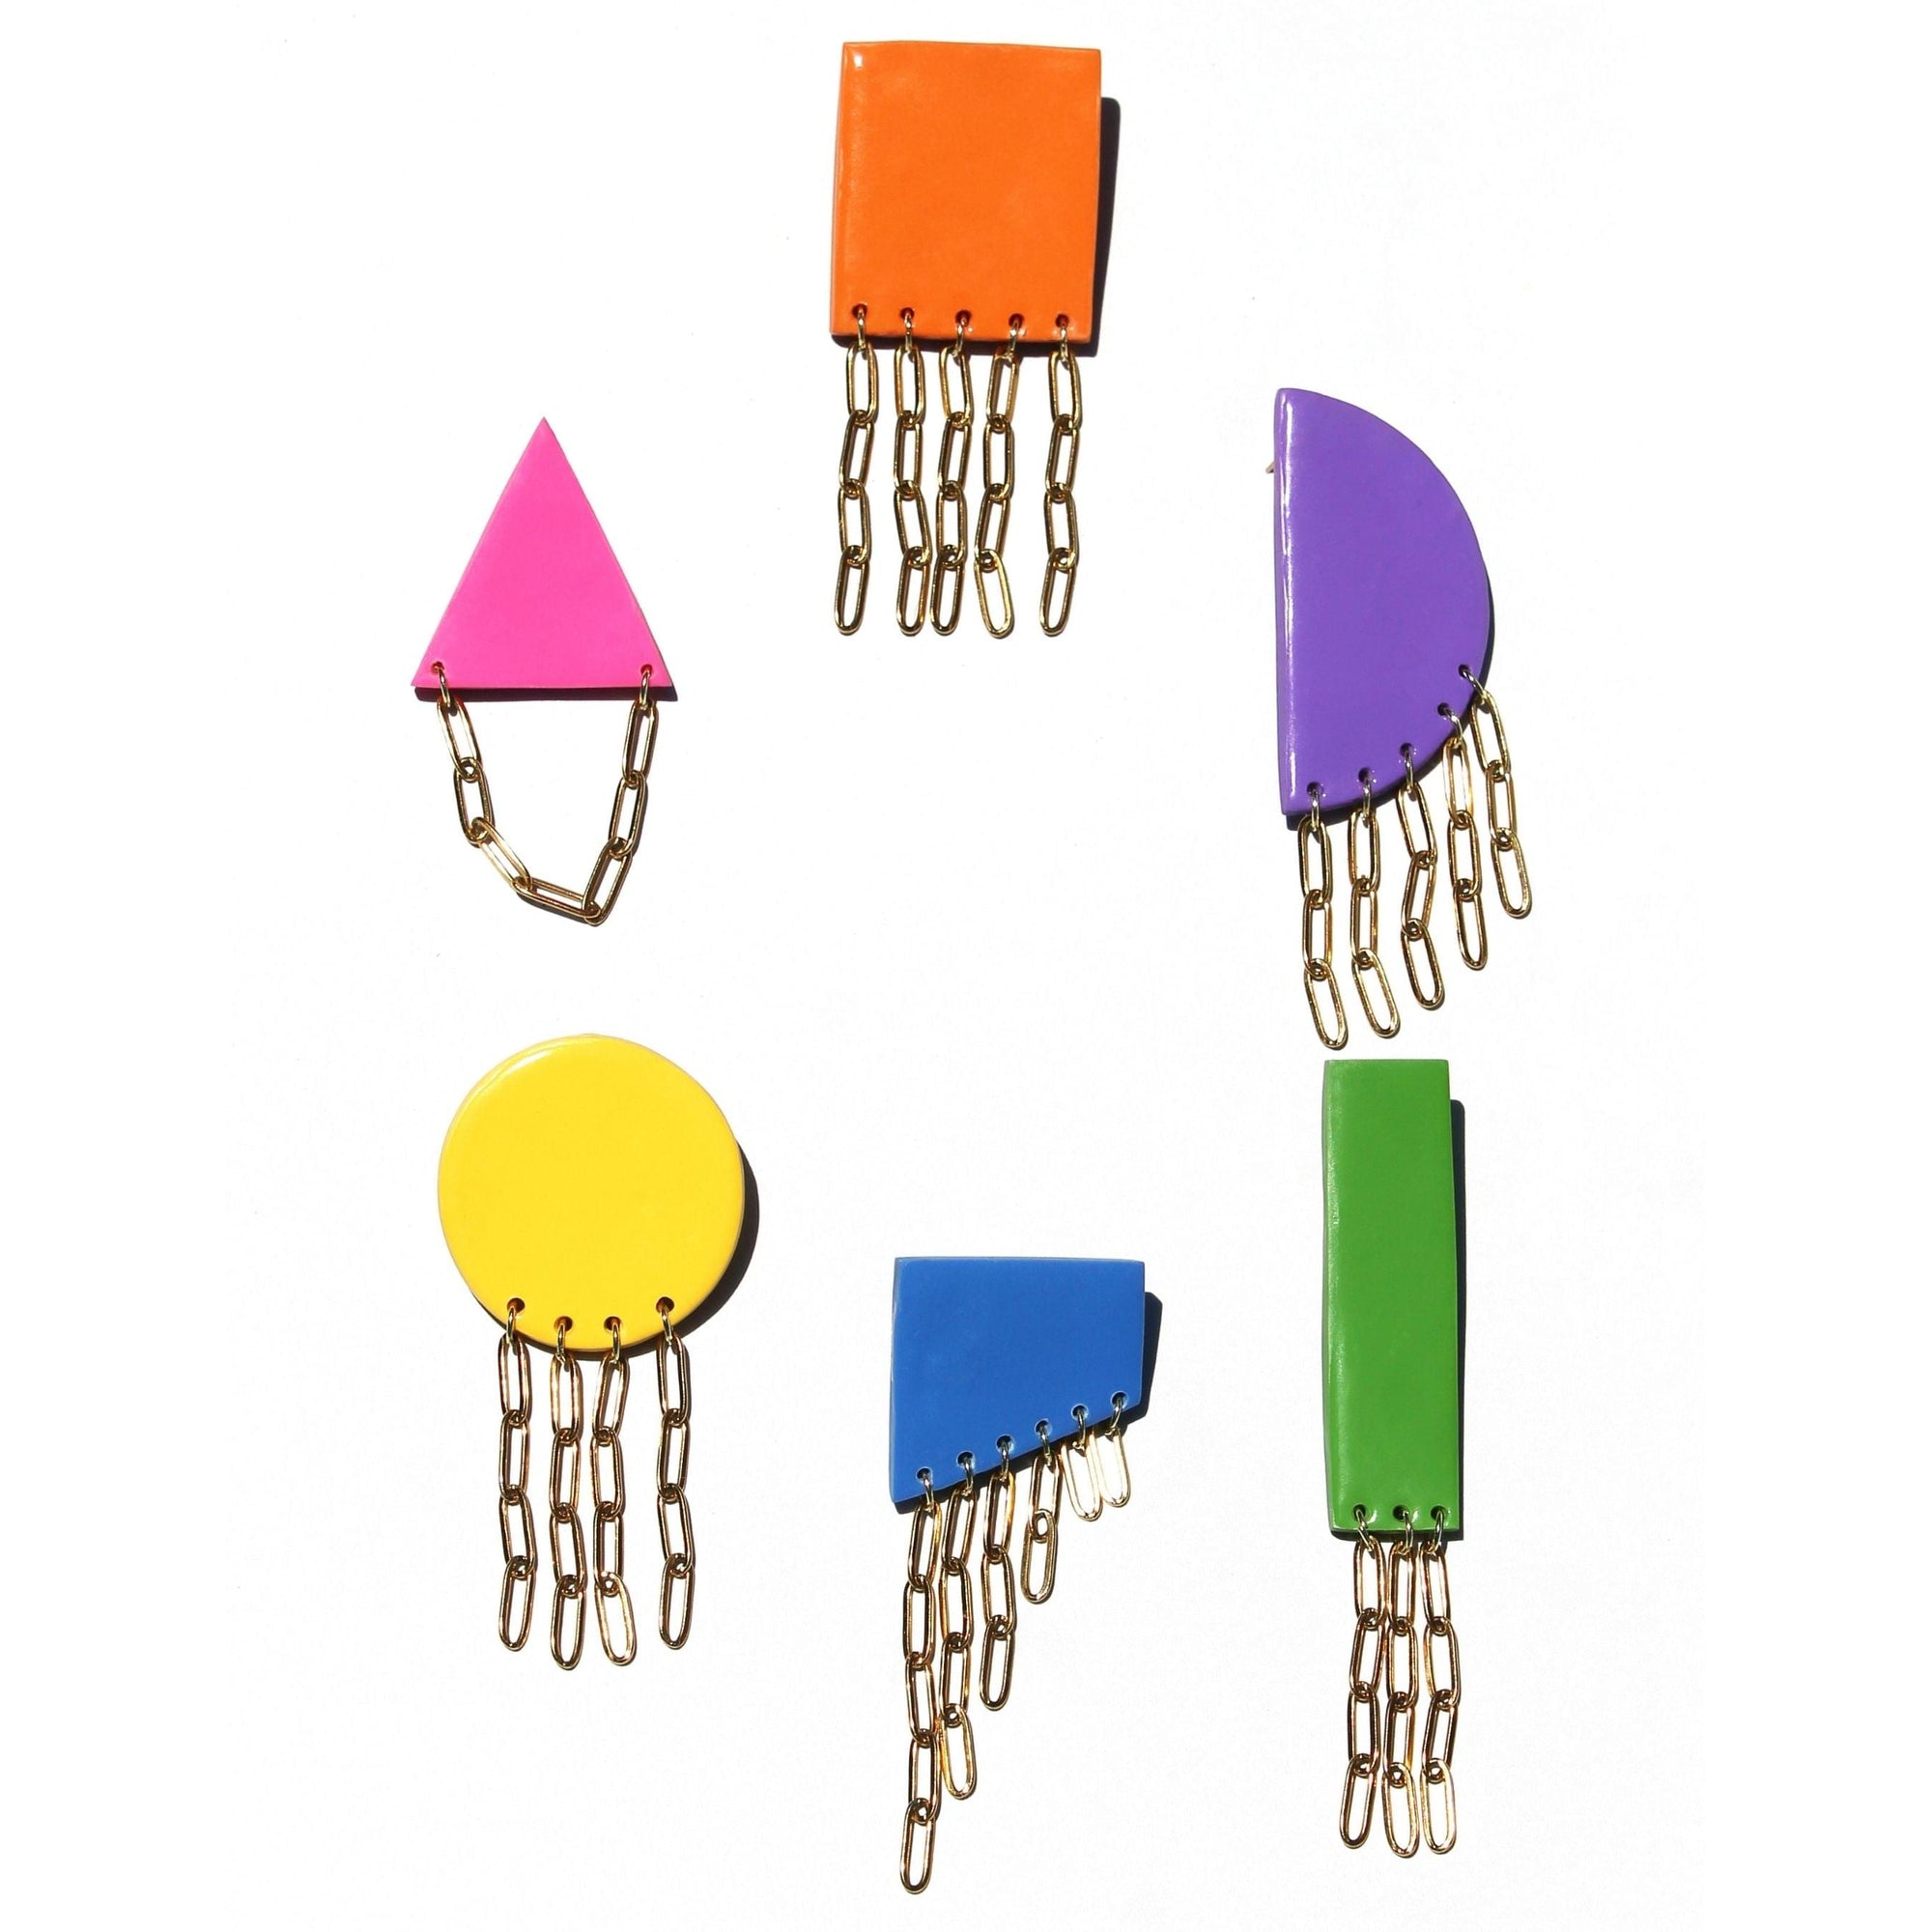 create your own mis-match earrings